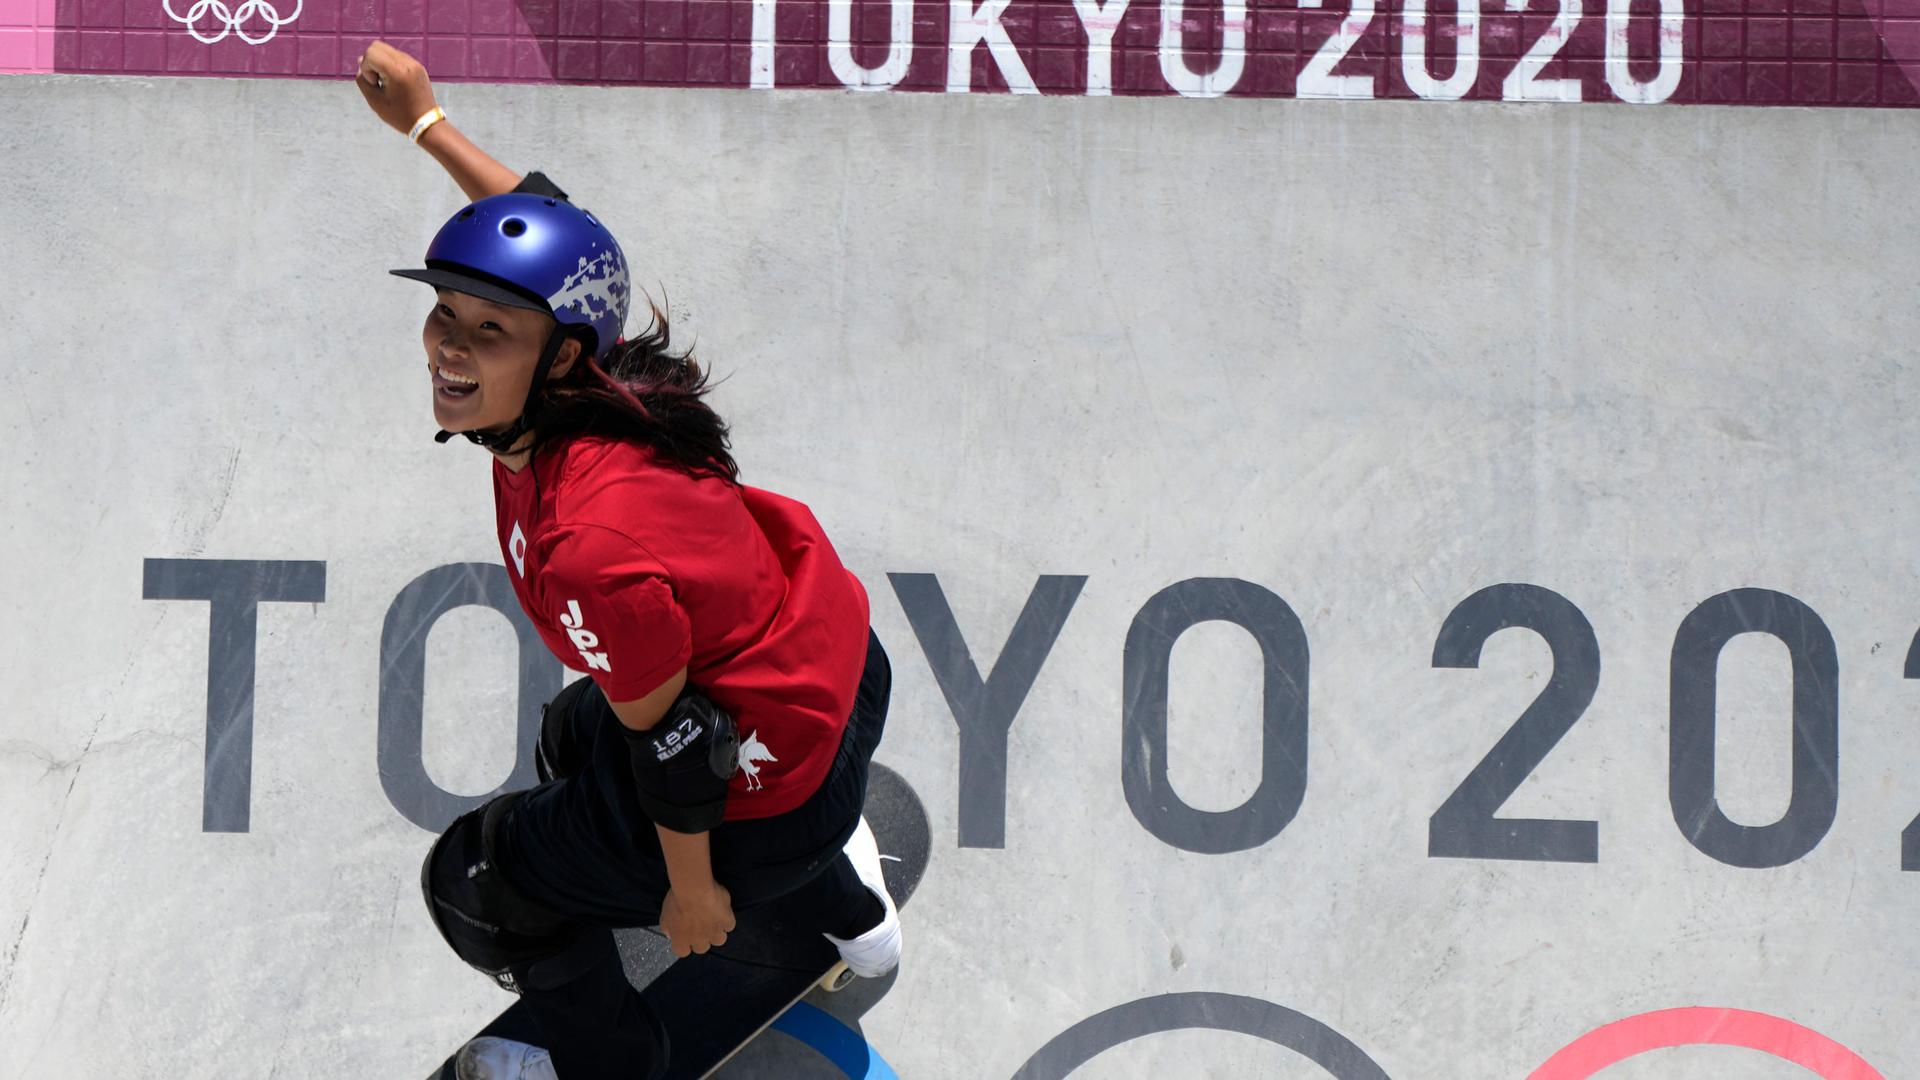 Sakura Yosozumi is shown wearing a red shirt and purple helmet while skateboarding down a wall with "Tokyo 2020" painted on it.